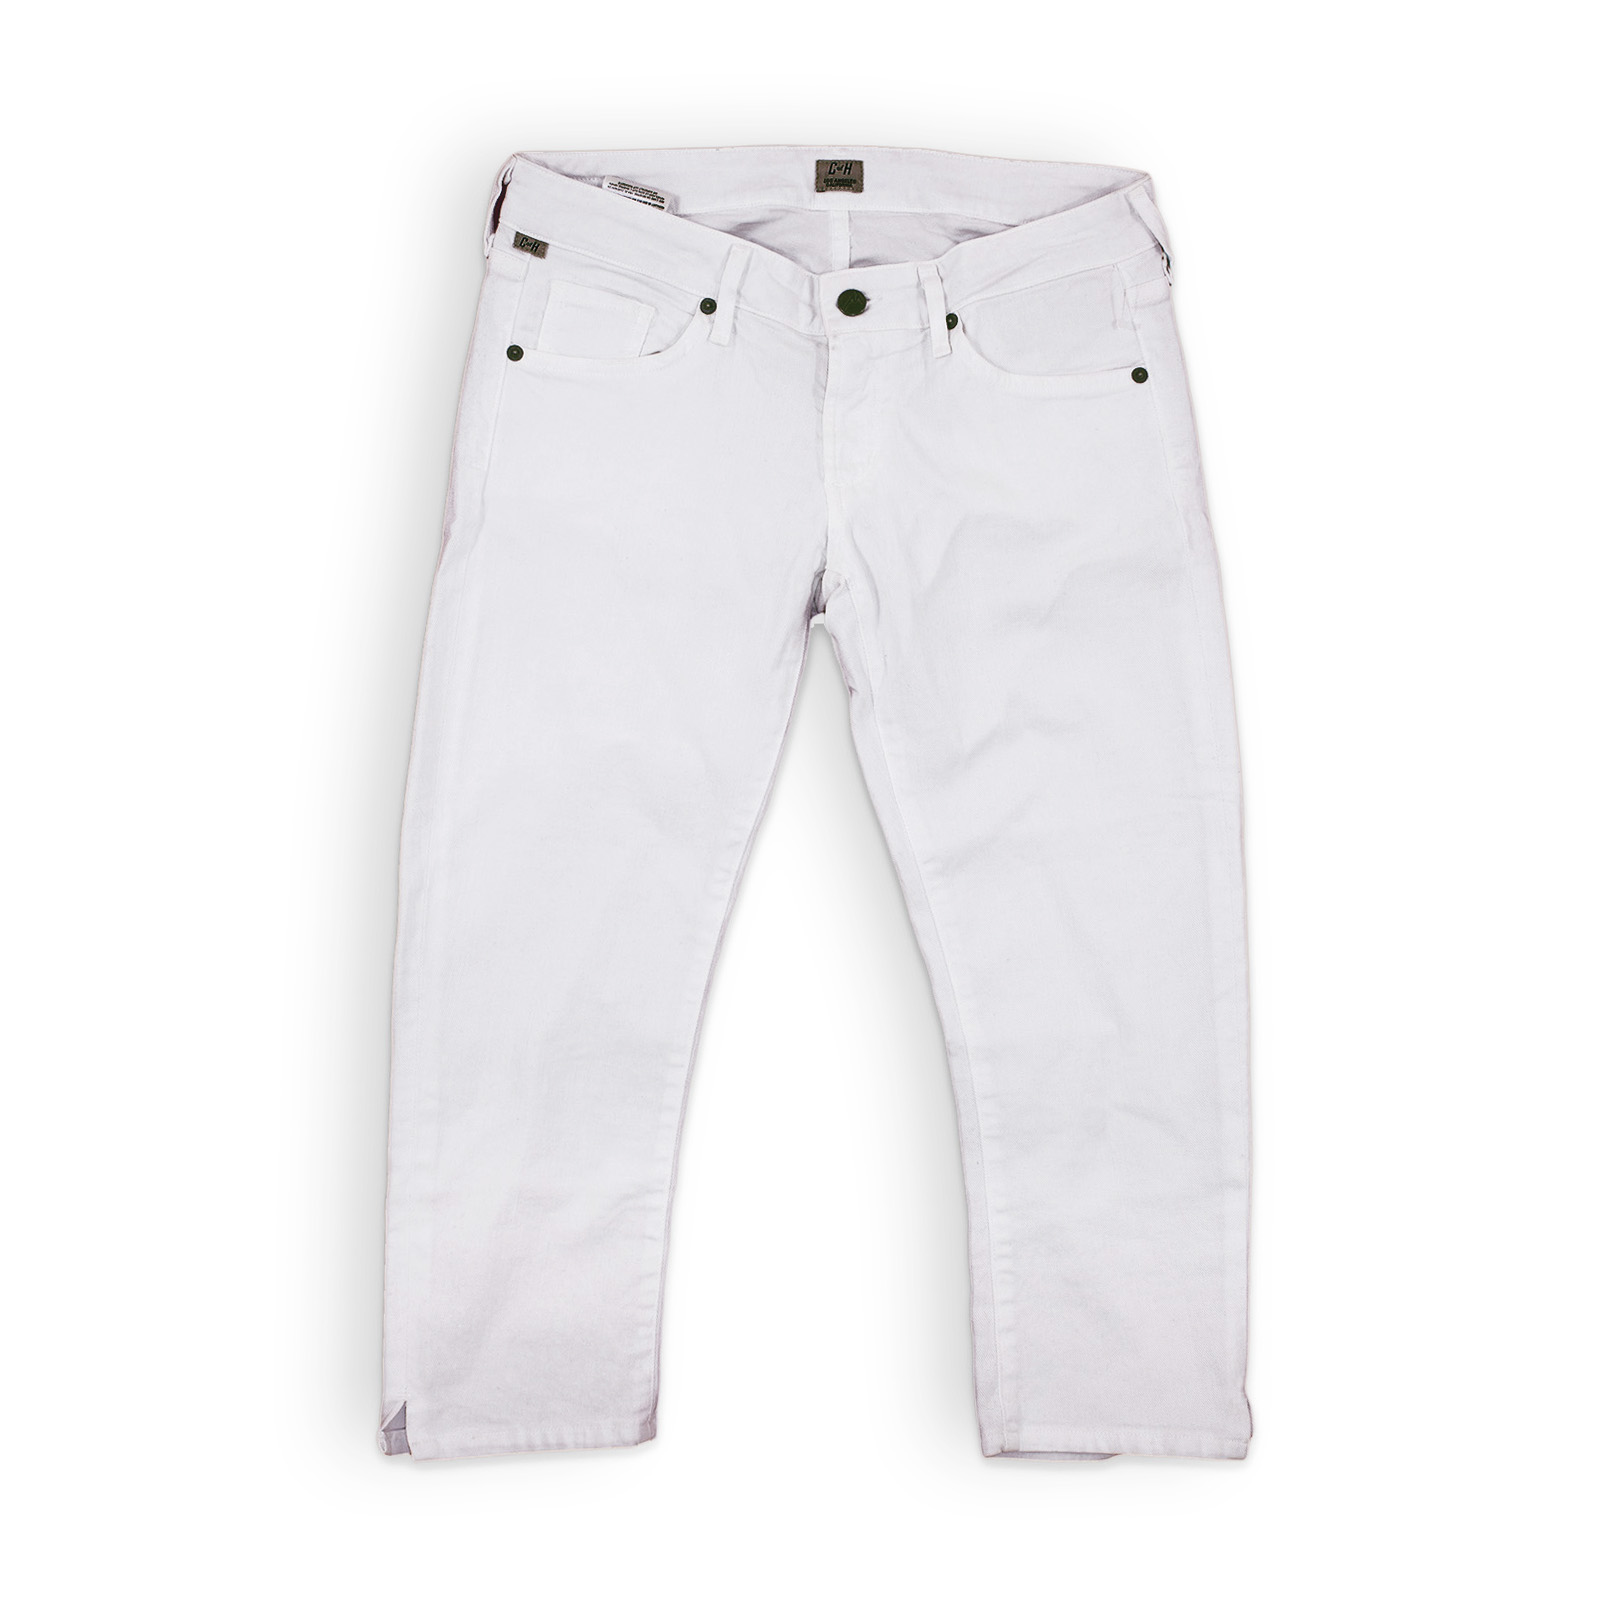 white jeans in store